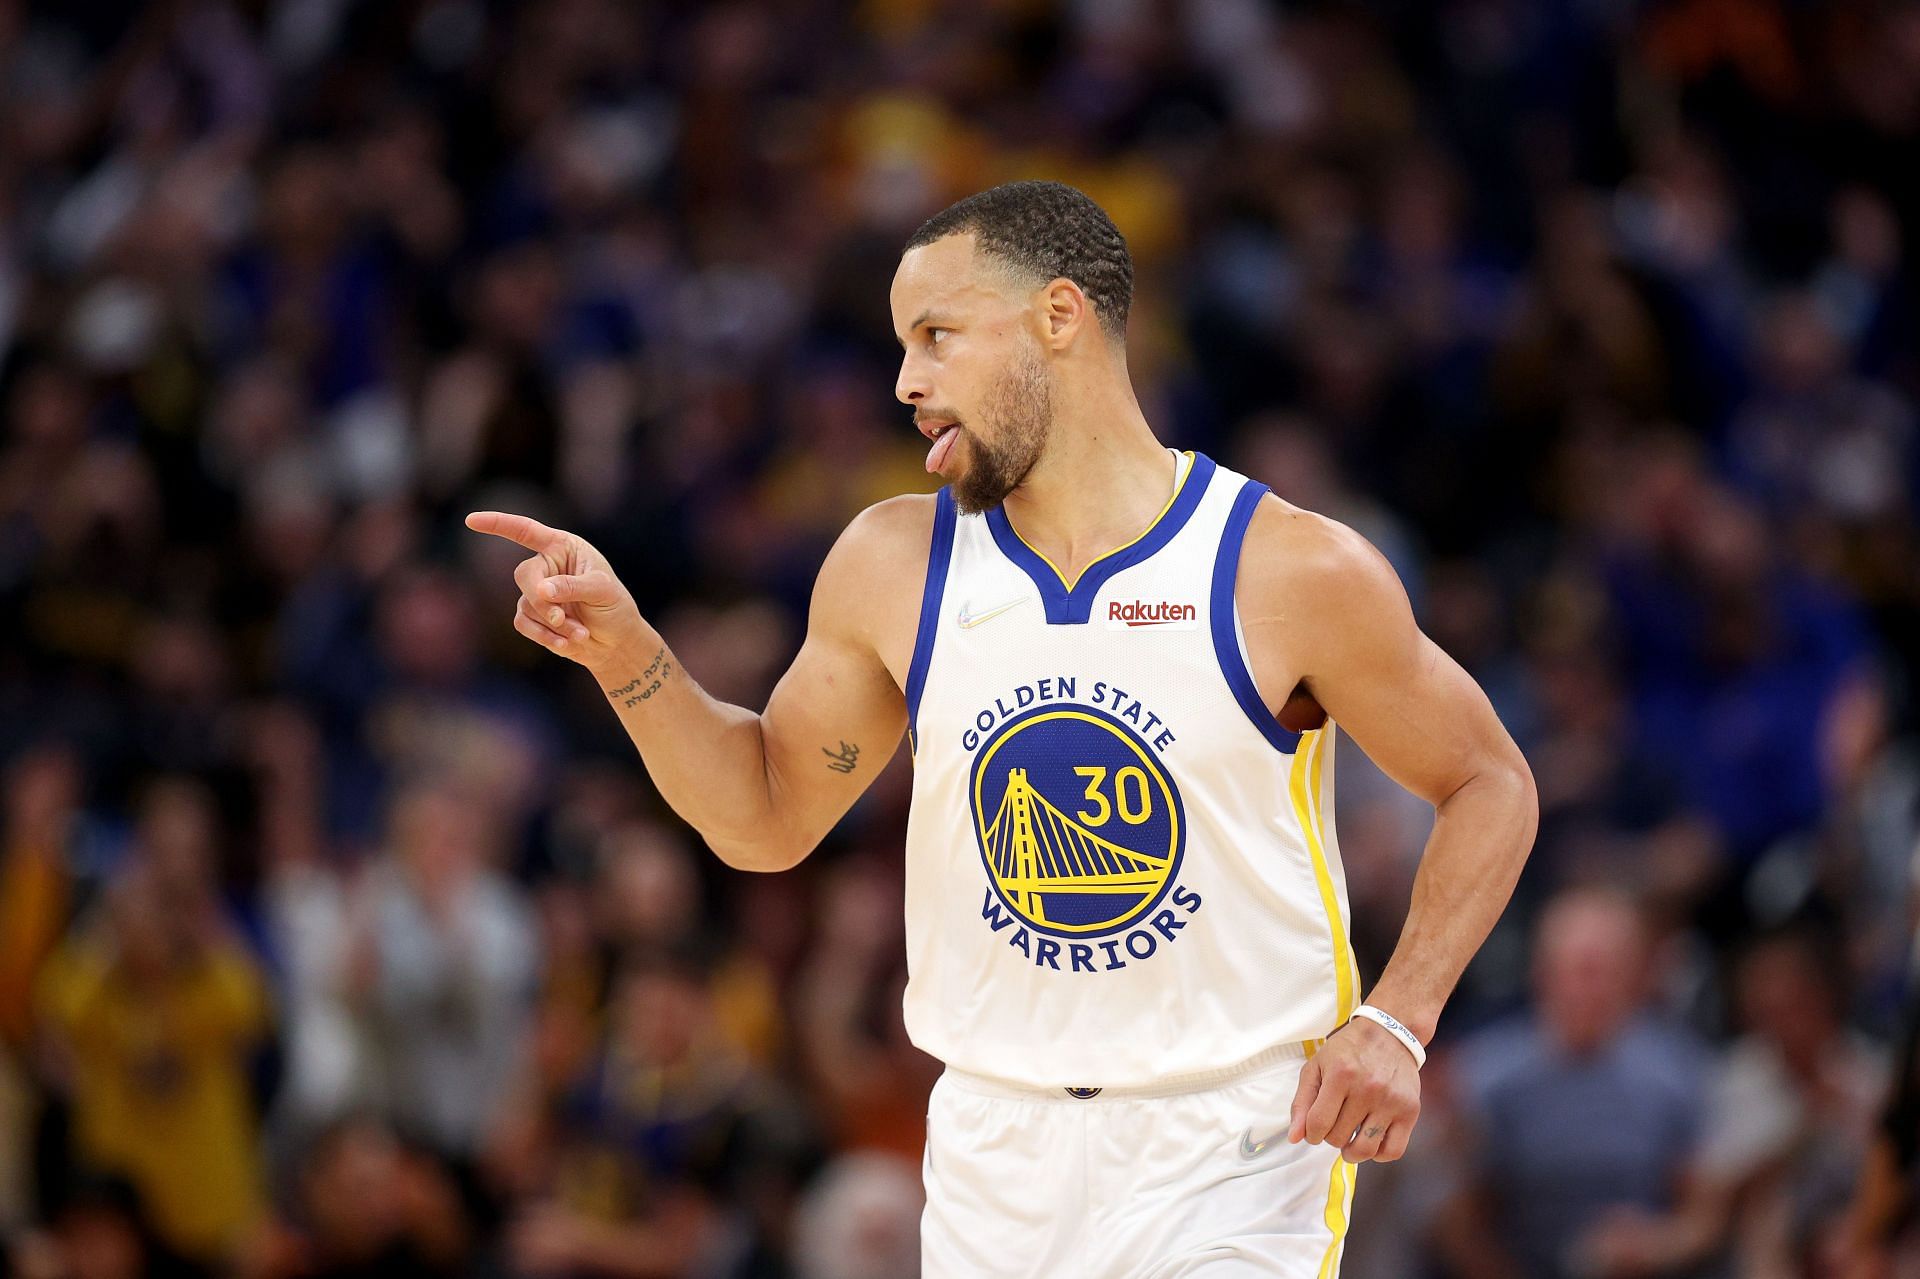 Steph Curry scored a game-high 34 points in Game 2 vs the Nuggets.